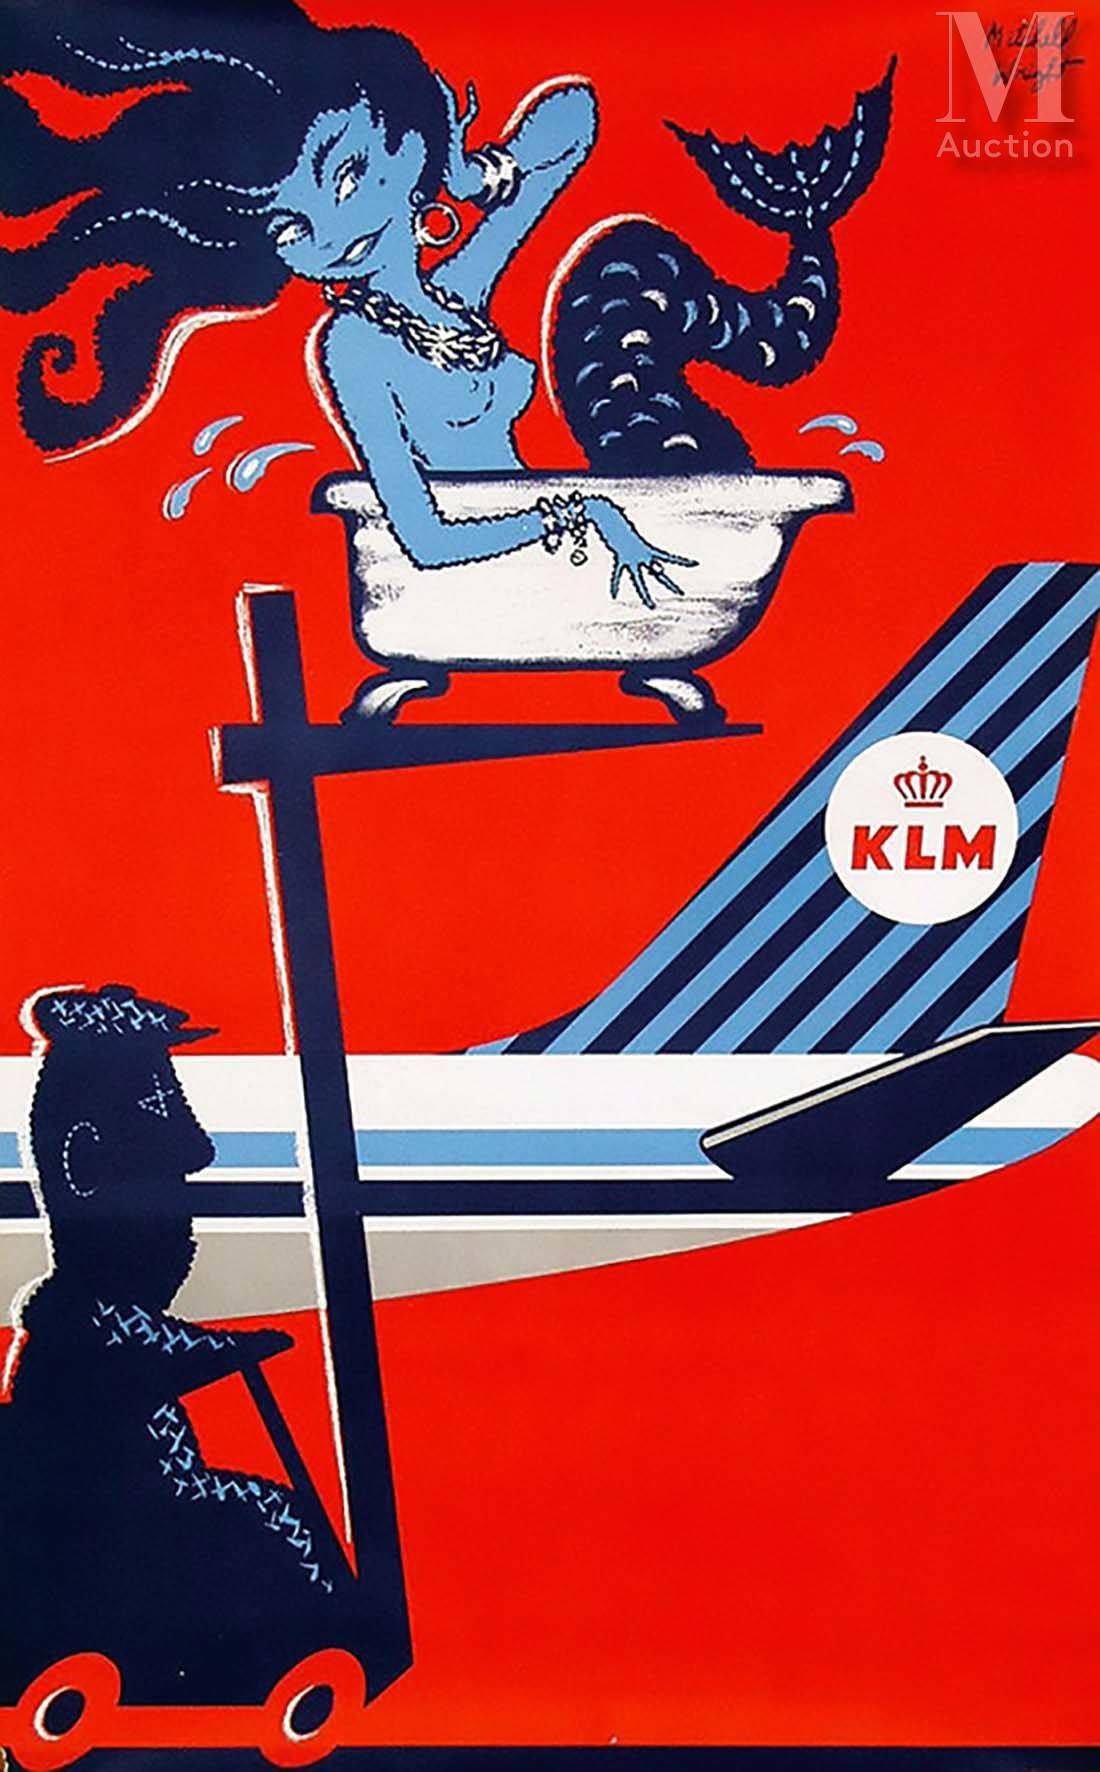 WRIGHT MITCHELL KLM Royal Dutch Airlines ( affiche rouge )
KLM Royal Dutch Airli&hellip;